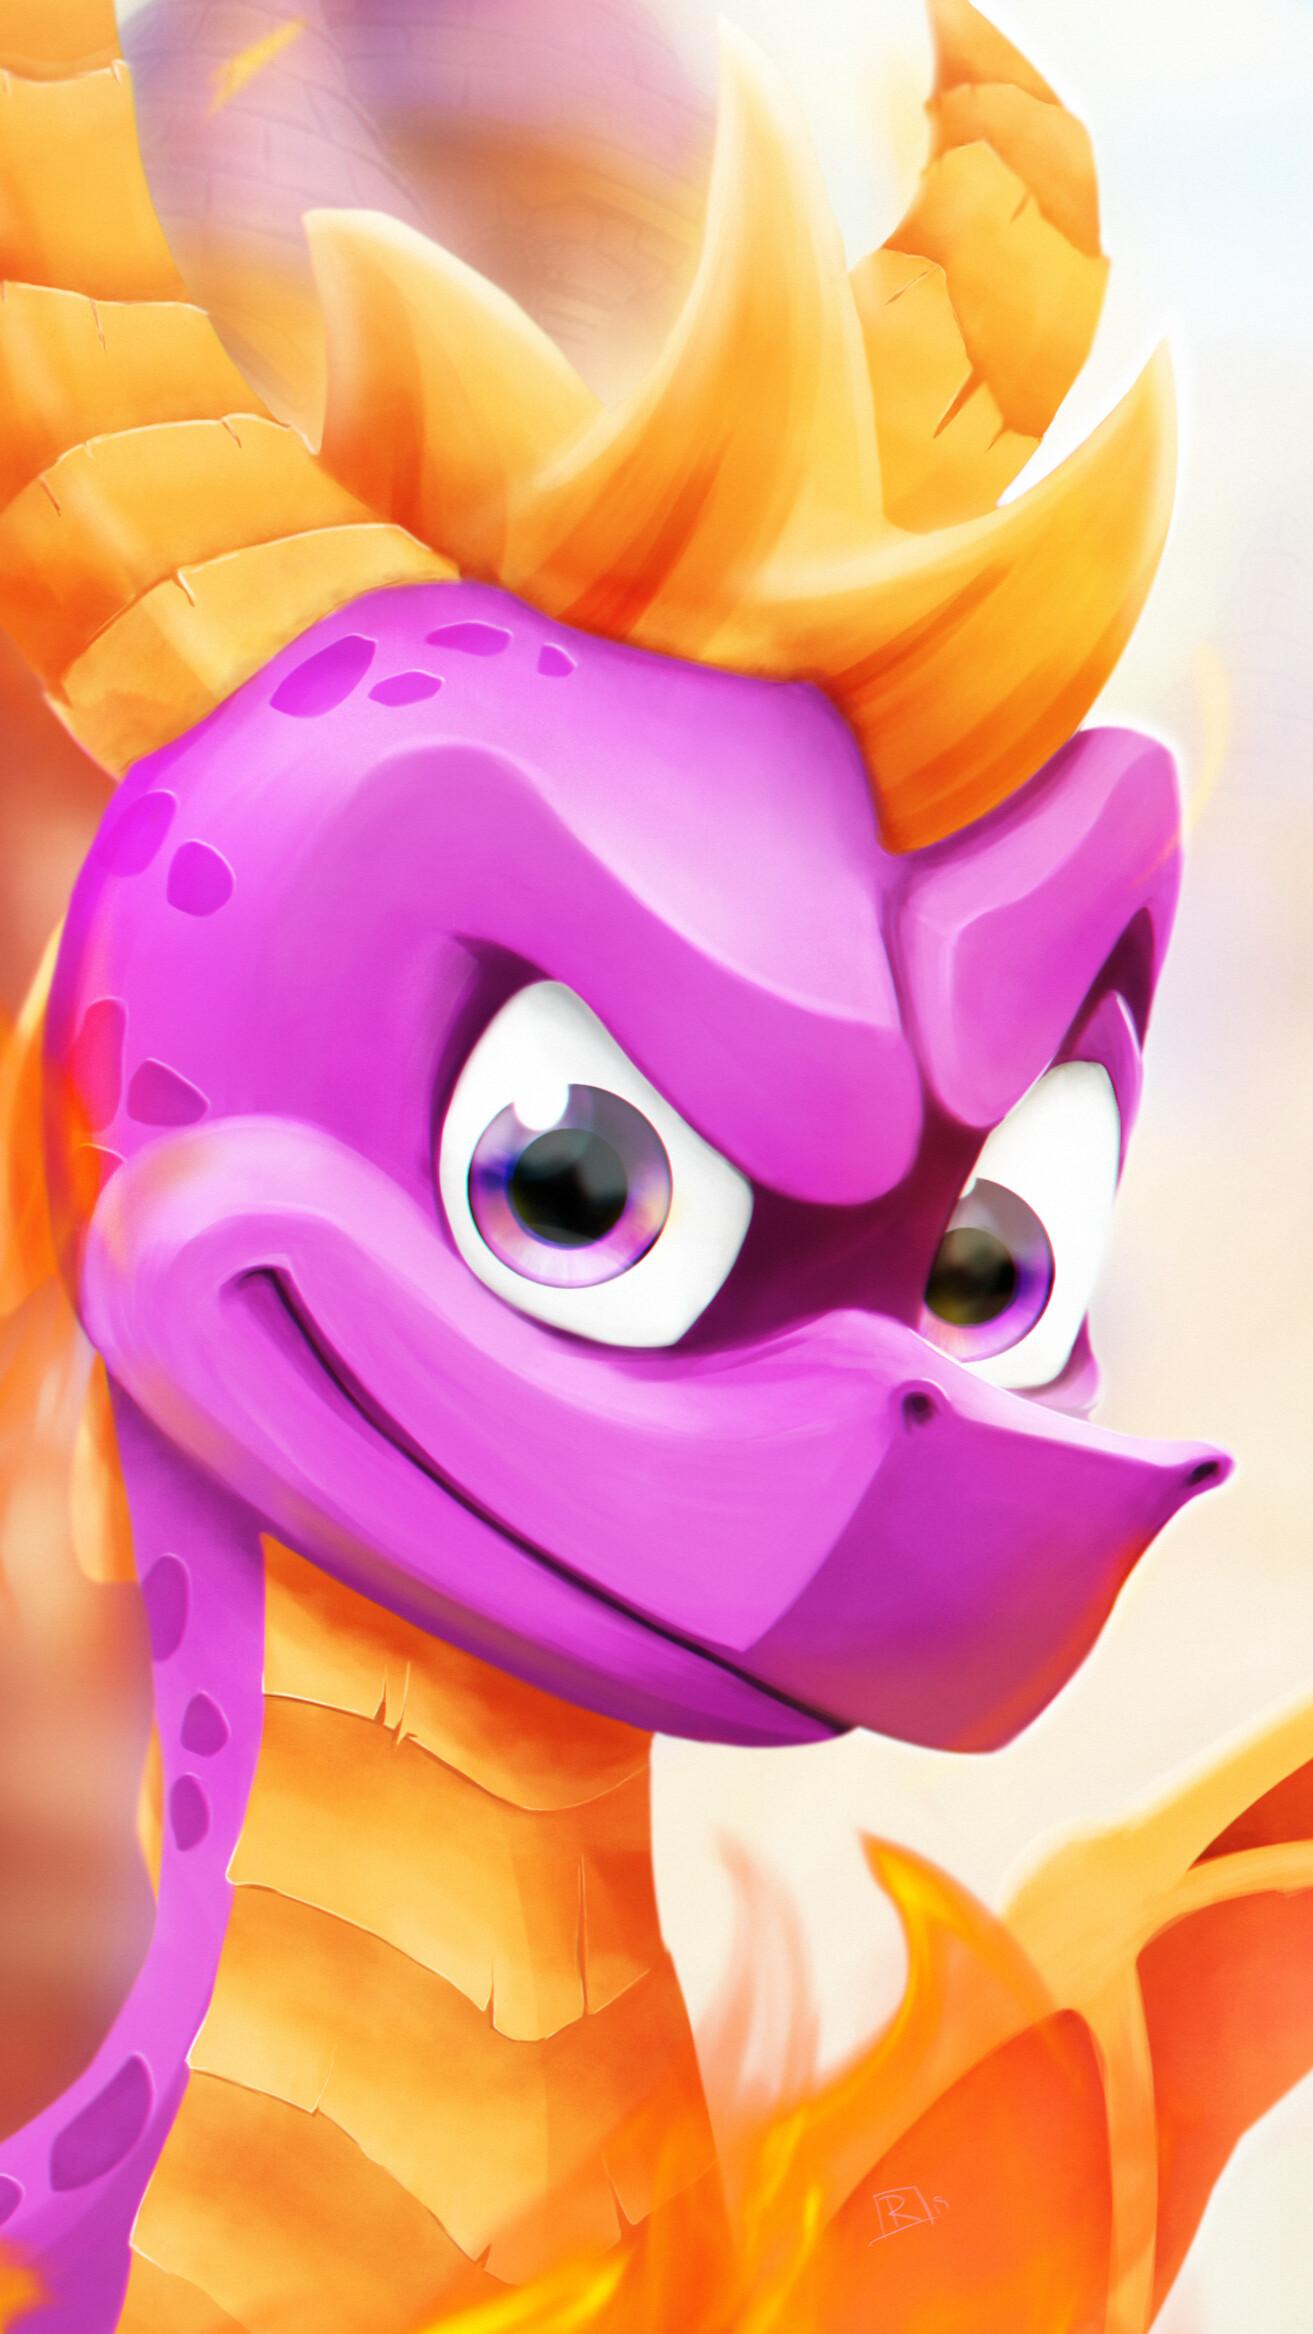 Spyro the Dragon phone wallpaper 1080P 2k 4k Full HD Wallpapers  Backgrounds Free Download  Wallpaper Crafter